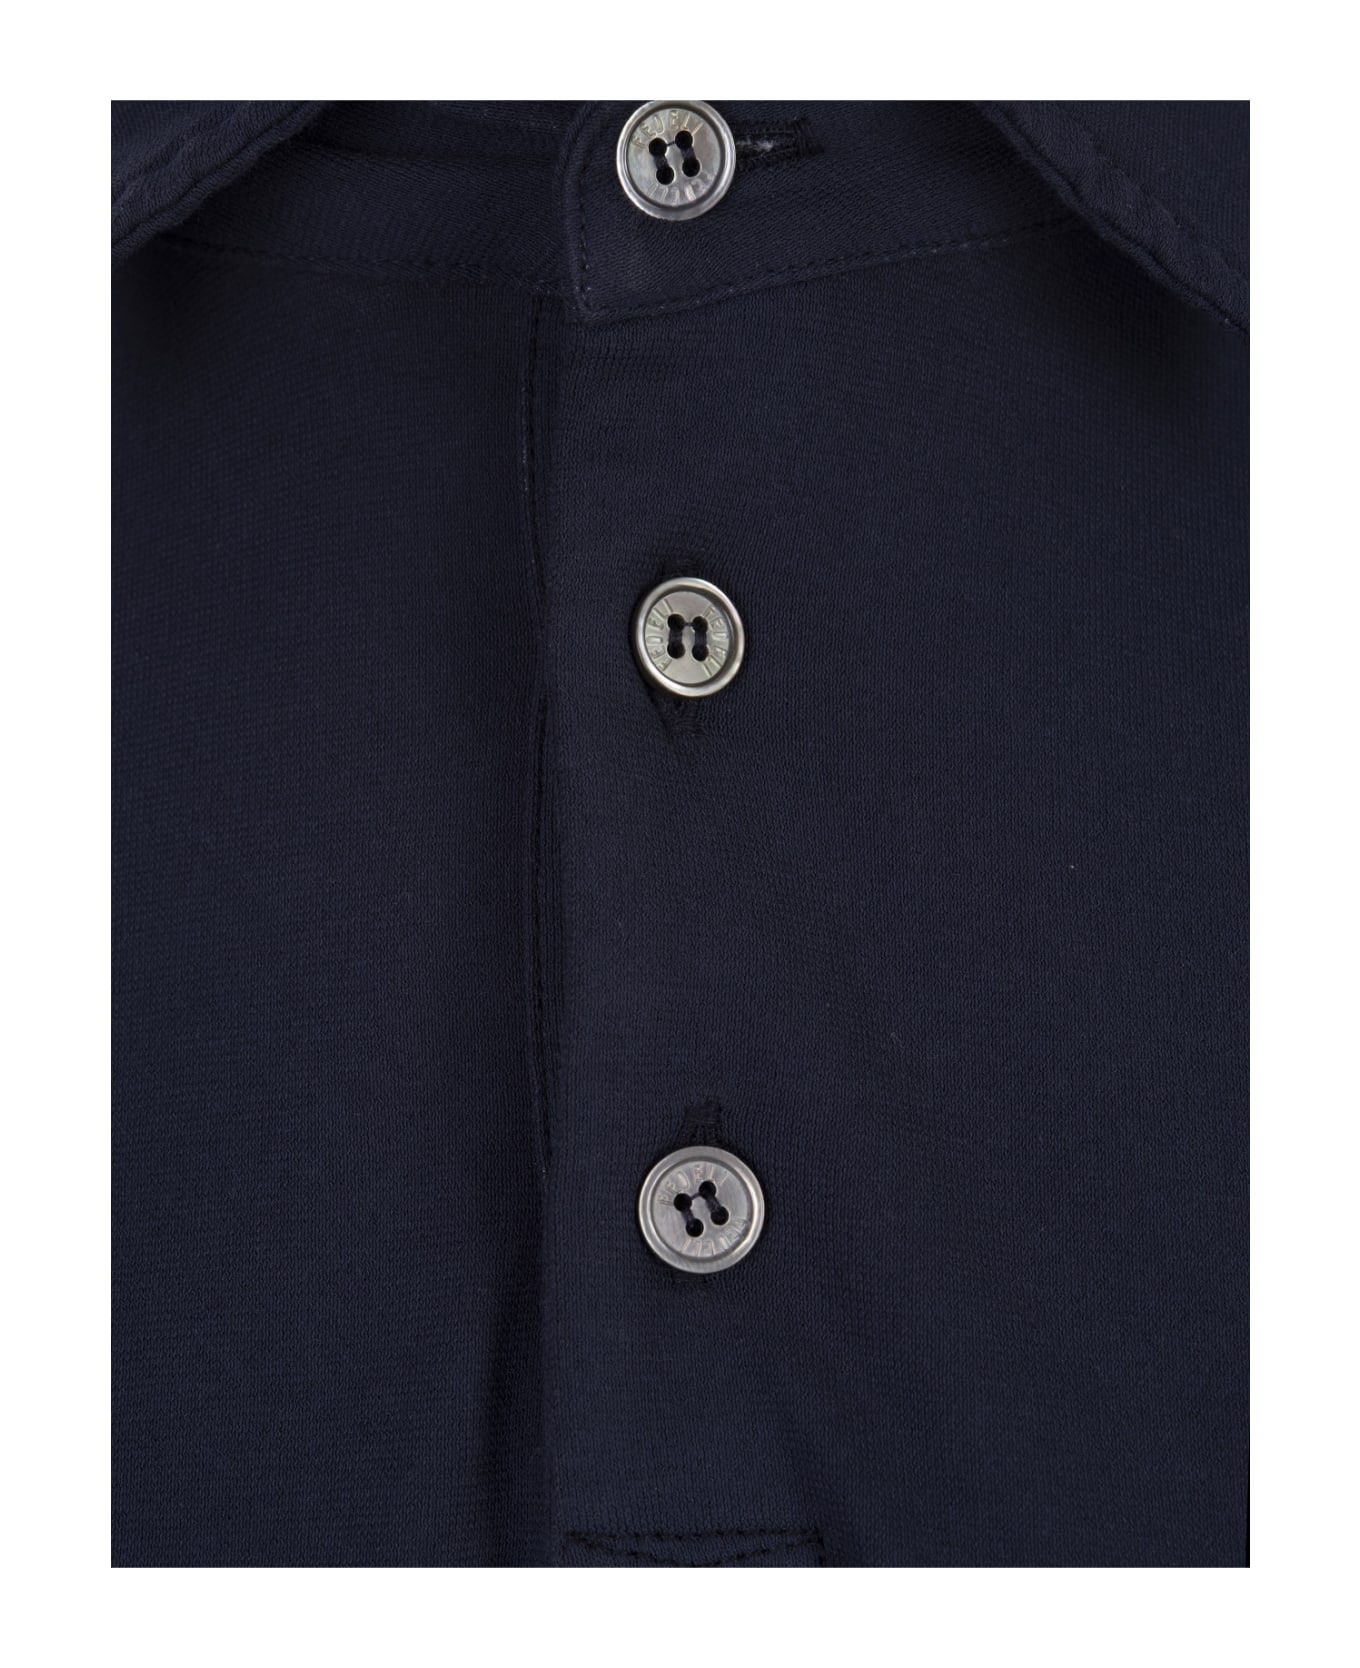 Fedeli Short-sleeved Polo Shirt In Navy Blue Cotton - Blue ポロシャツ